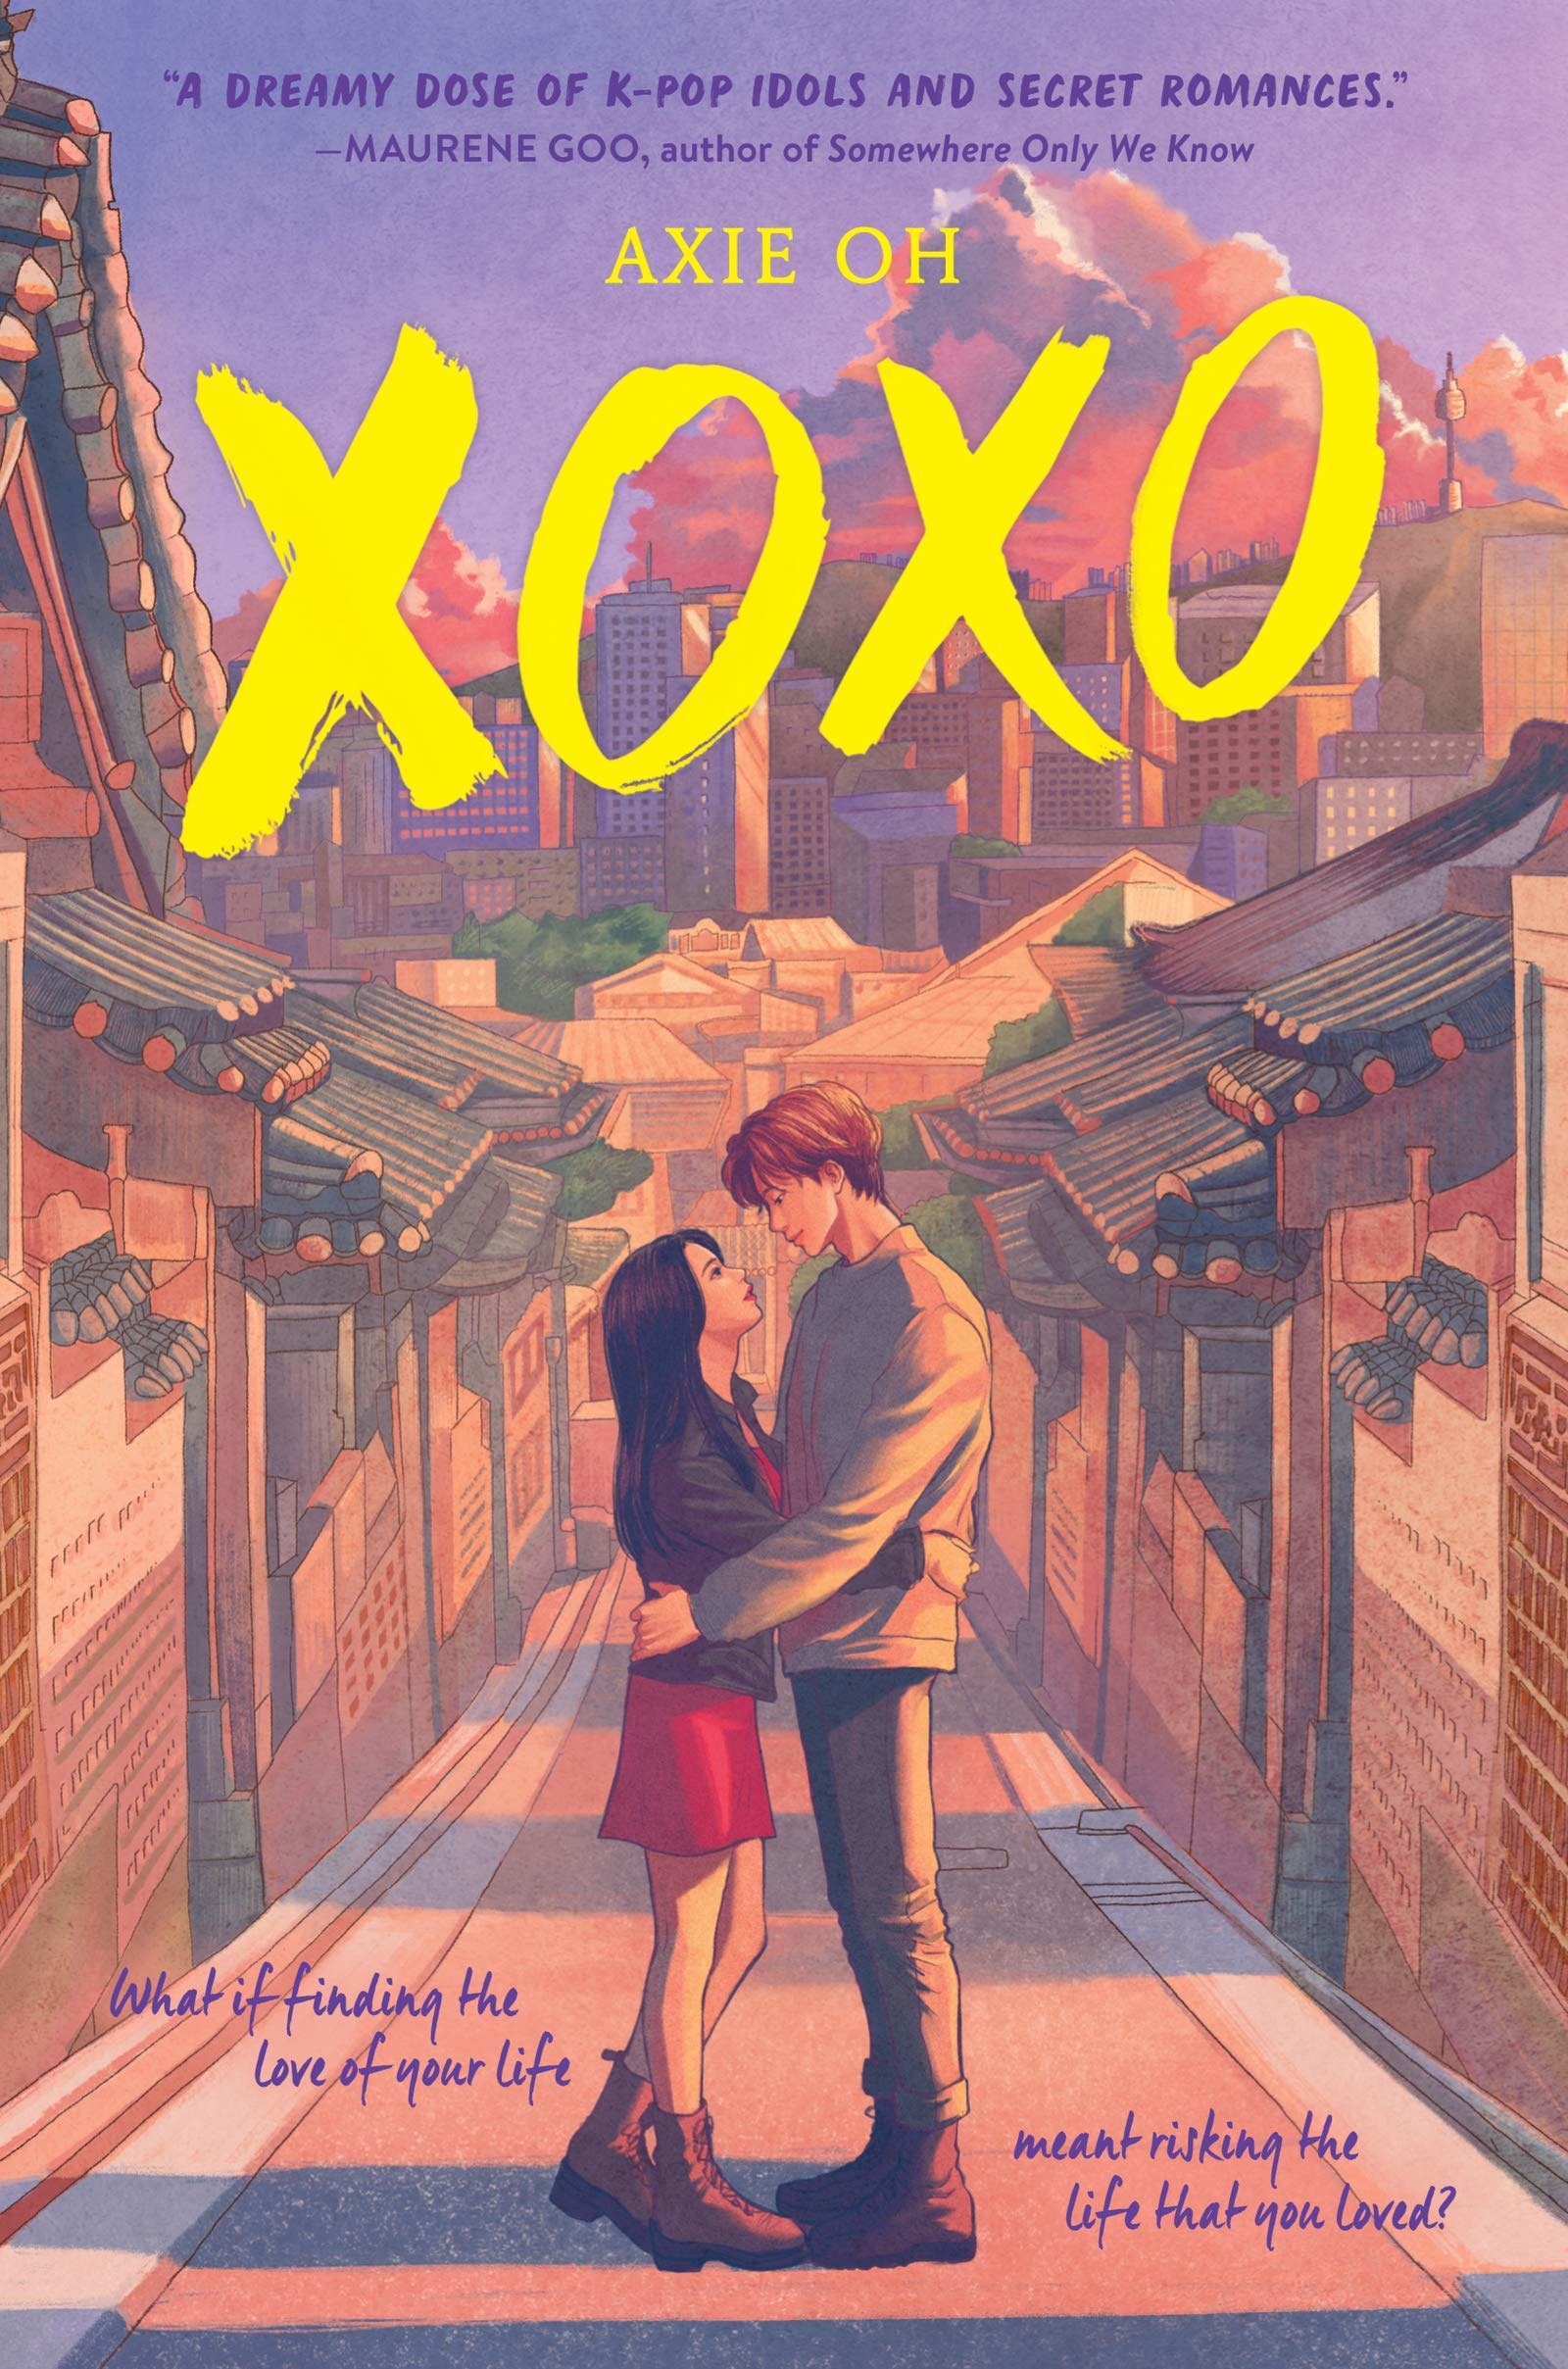 A girl and boy hold each other in sunset filled alleyway in Seoul